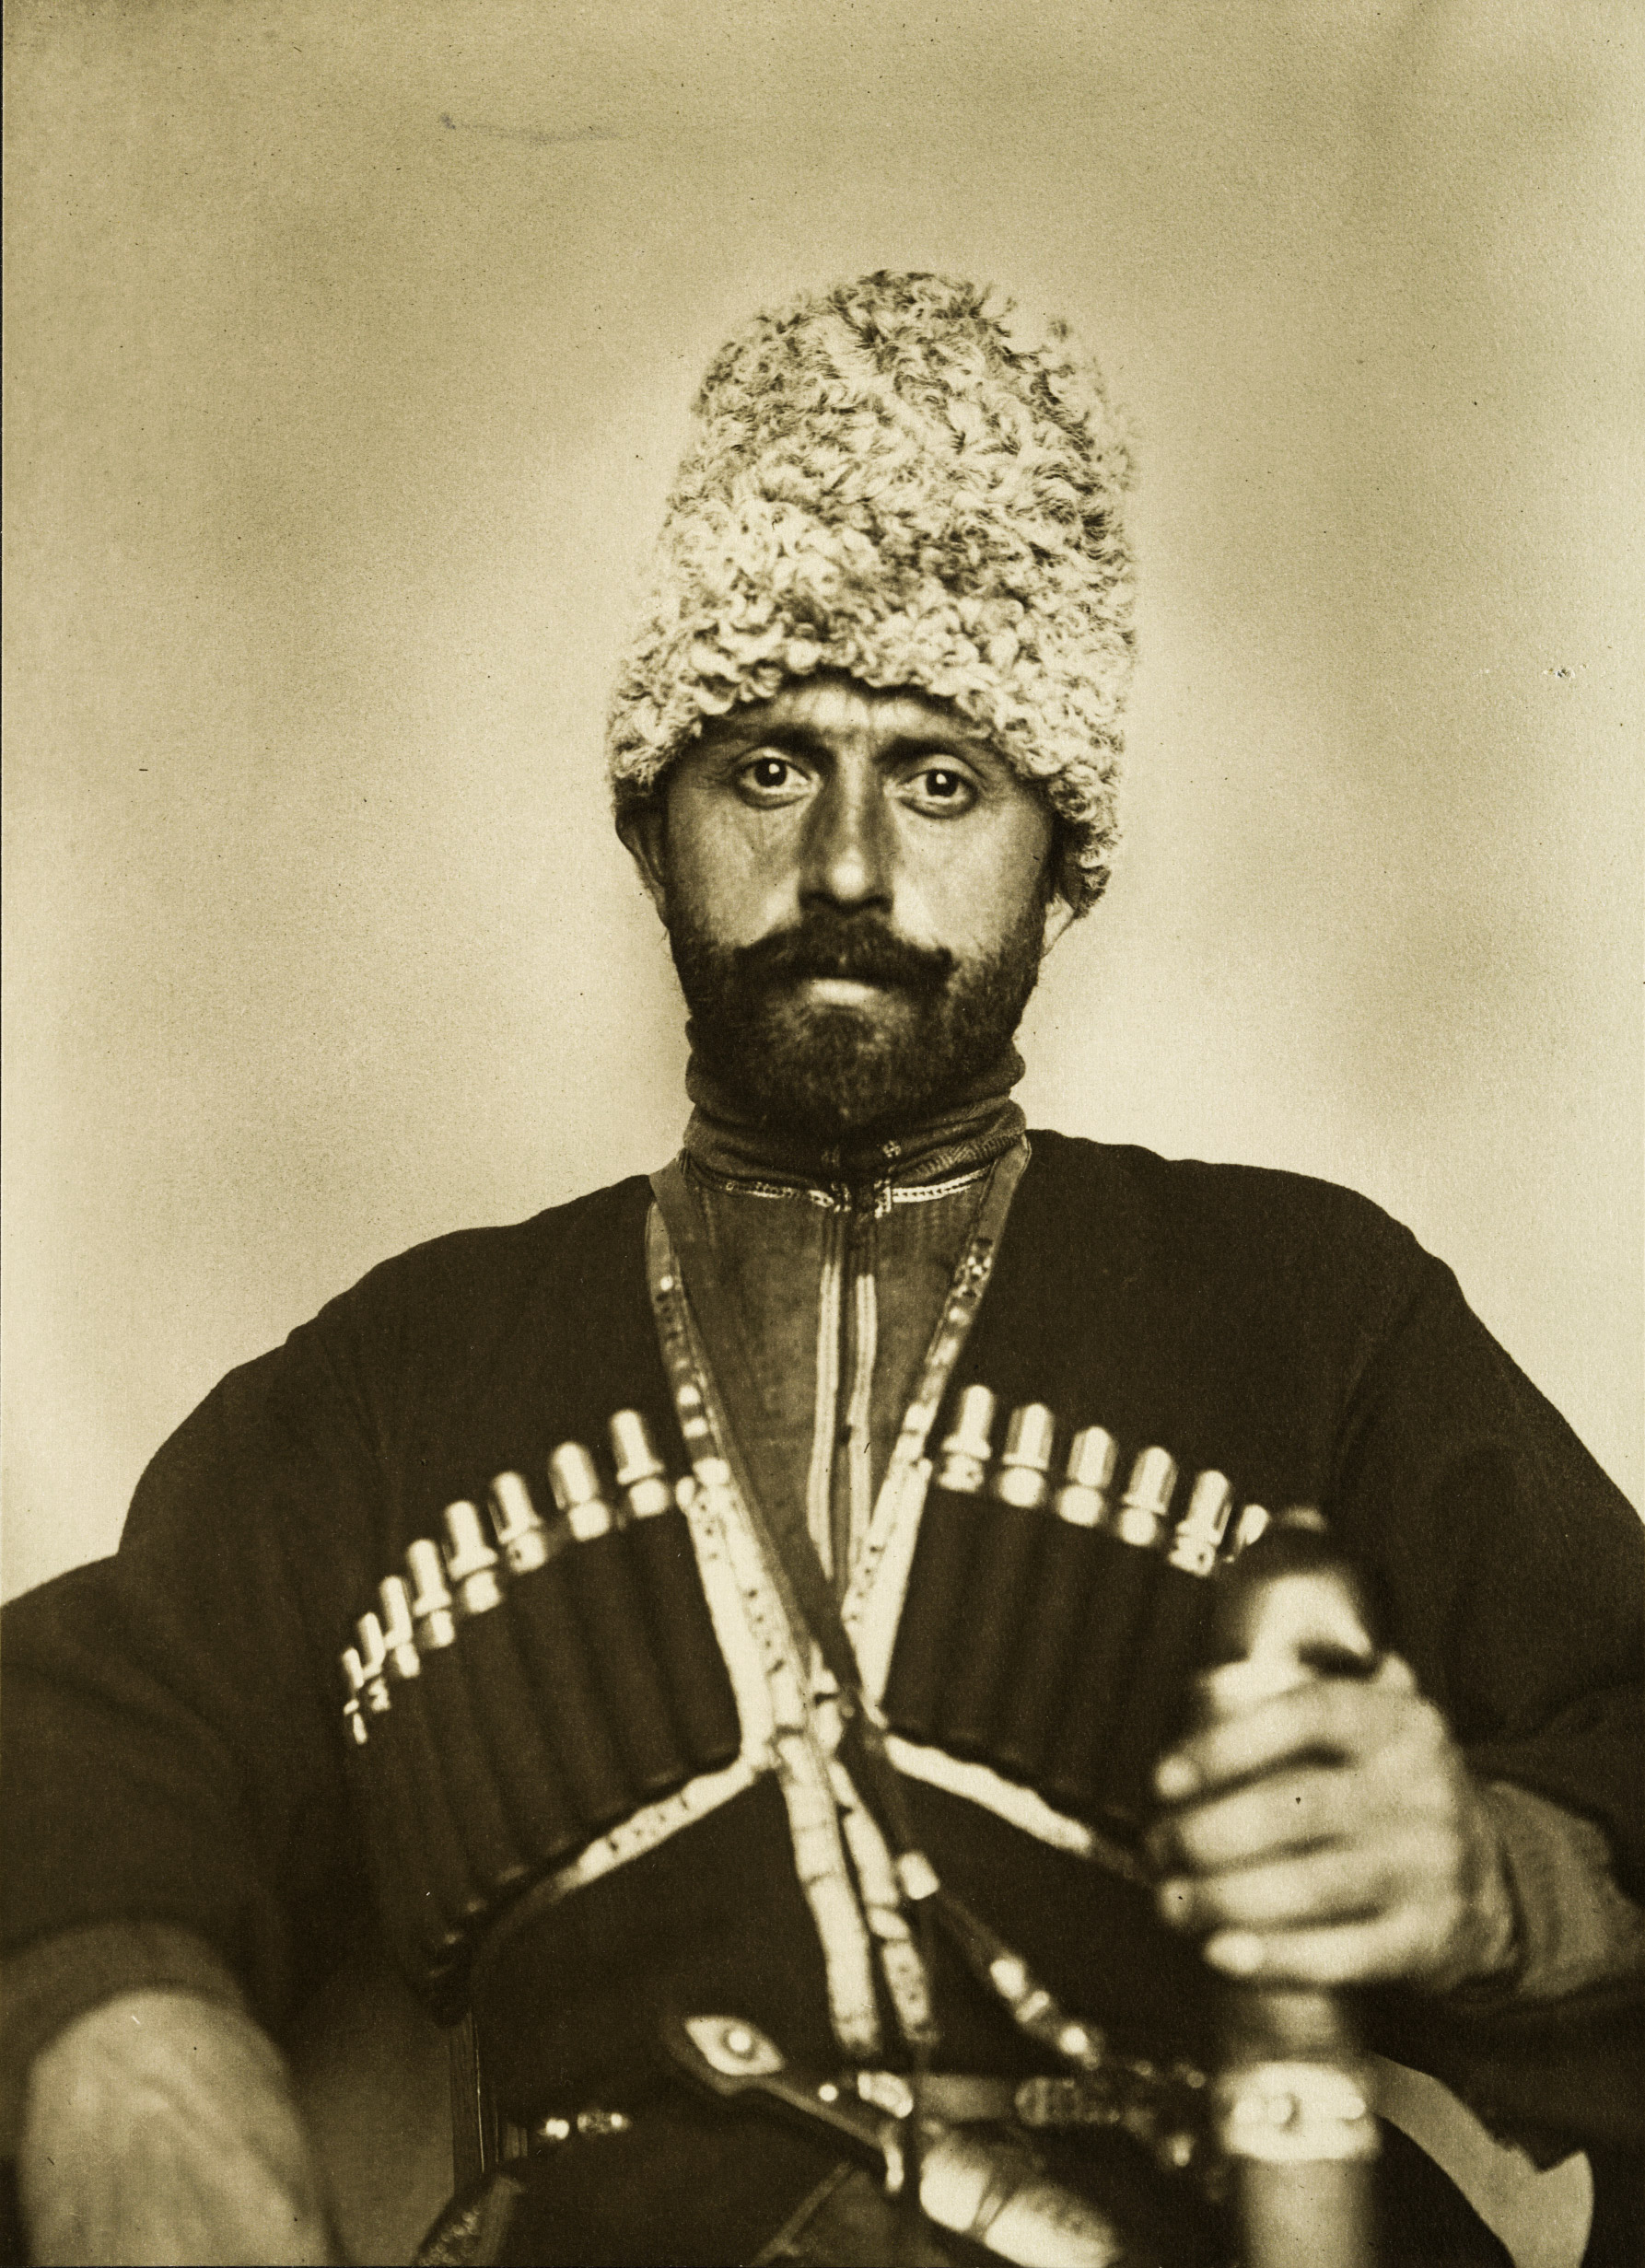 Portrait of a Cossack man from the steppes of Russia at the Ellis Island Immigration Station, circa 1905-1914.